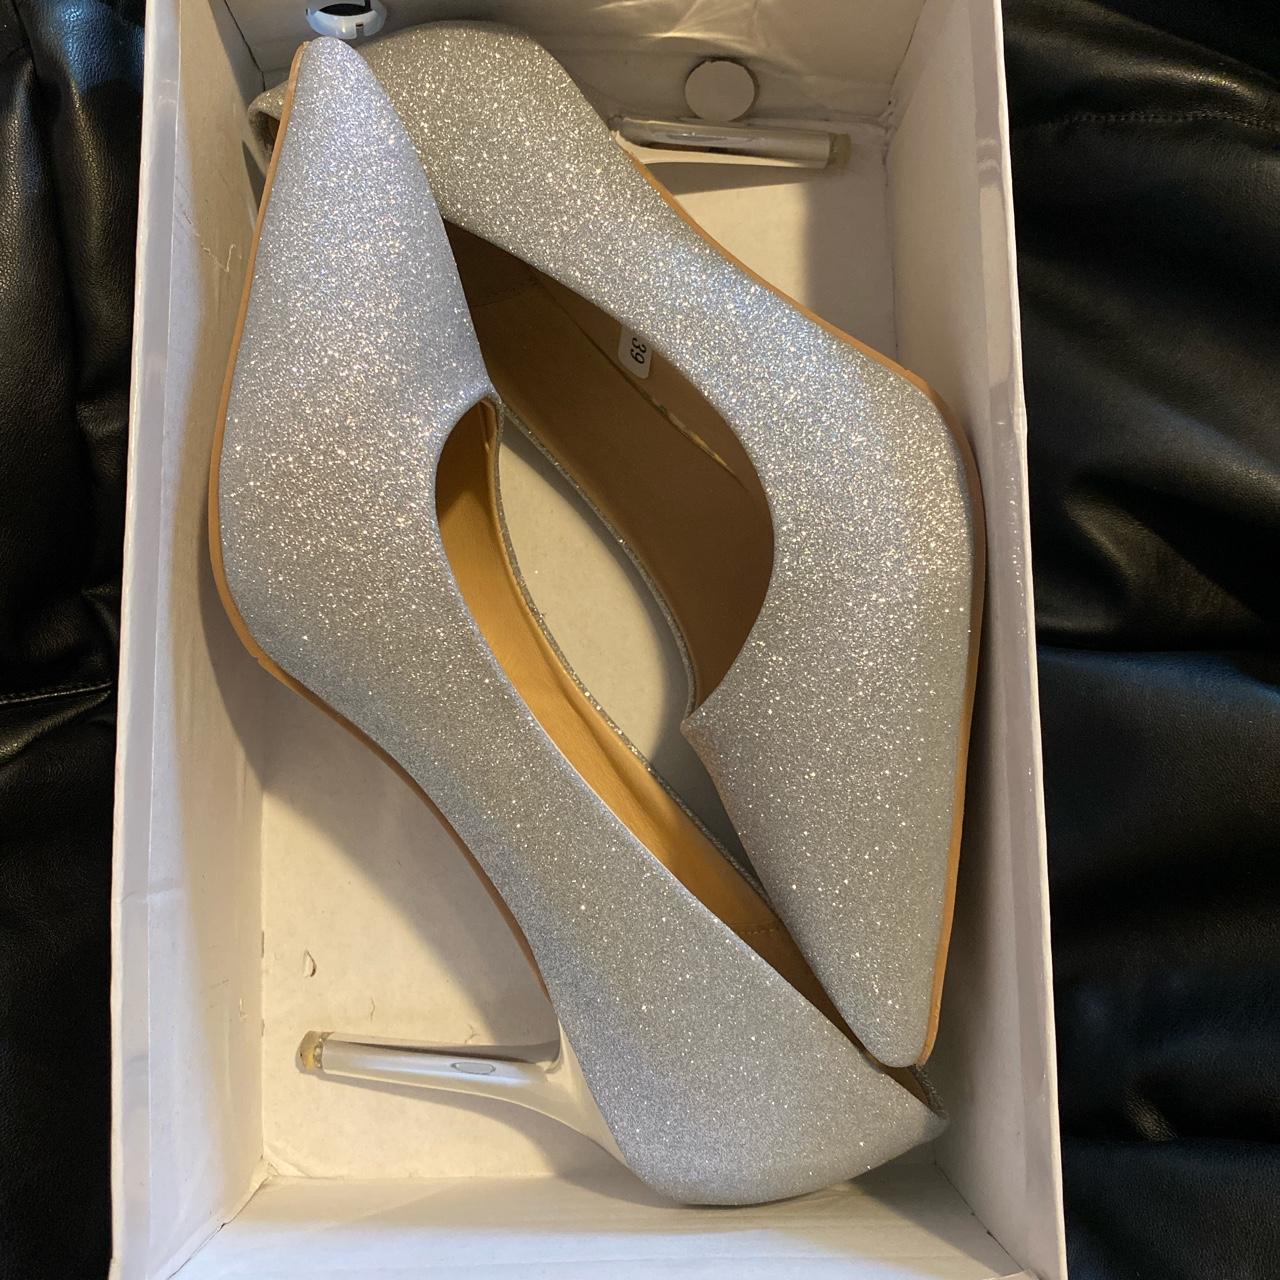 Product Image 1 - Sparkly heels never worn I